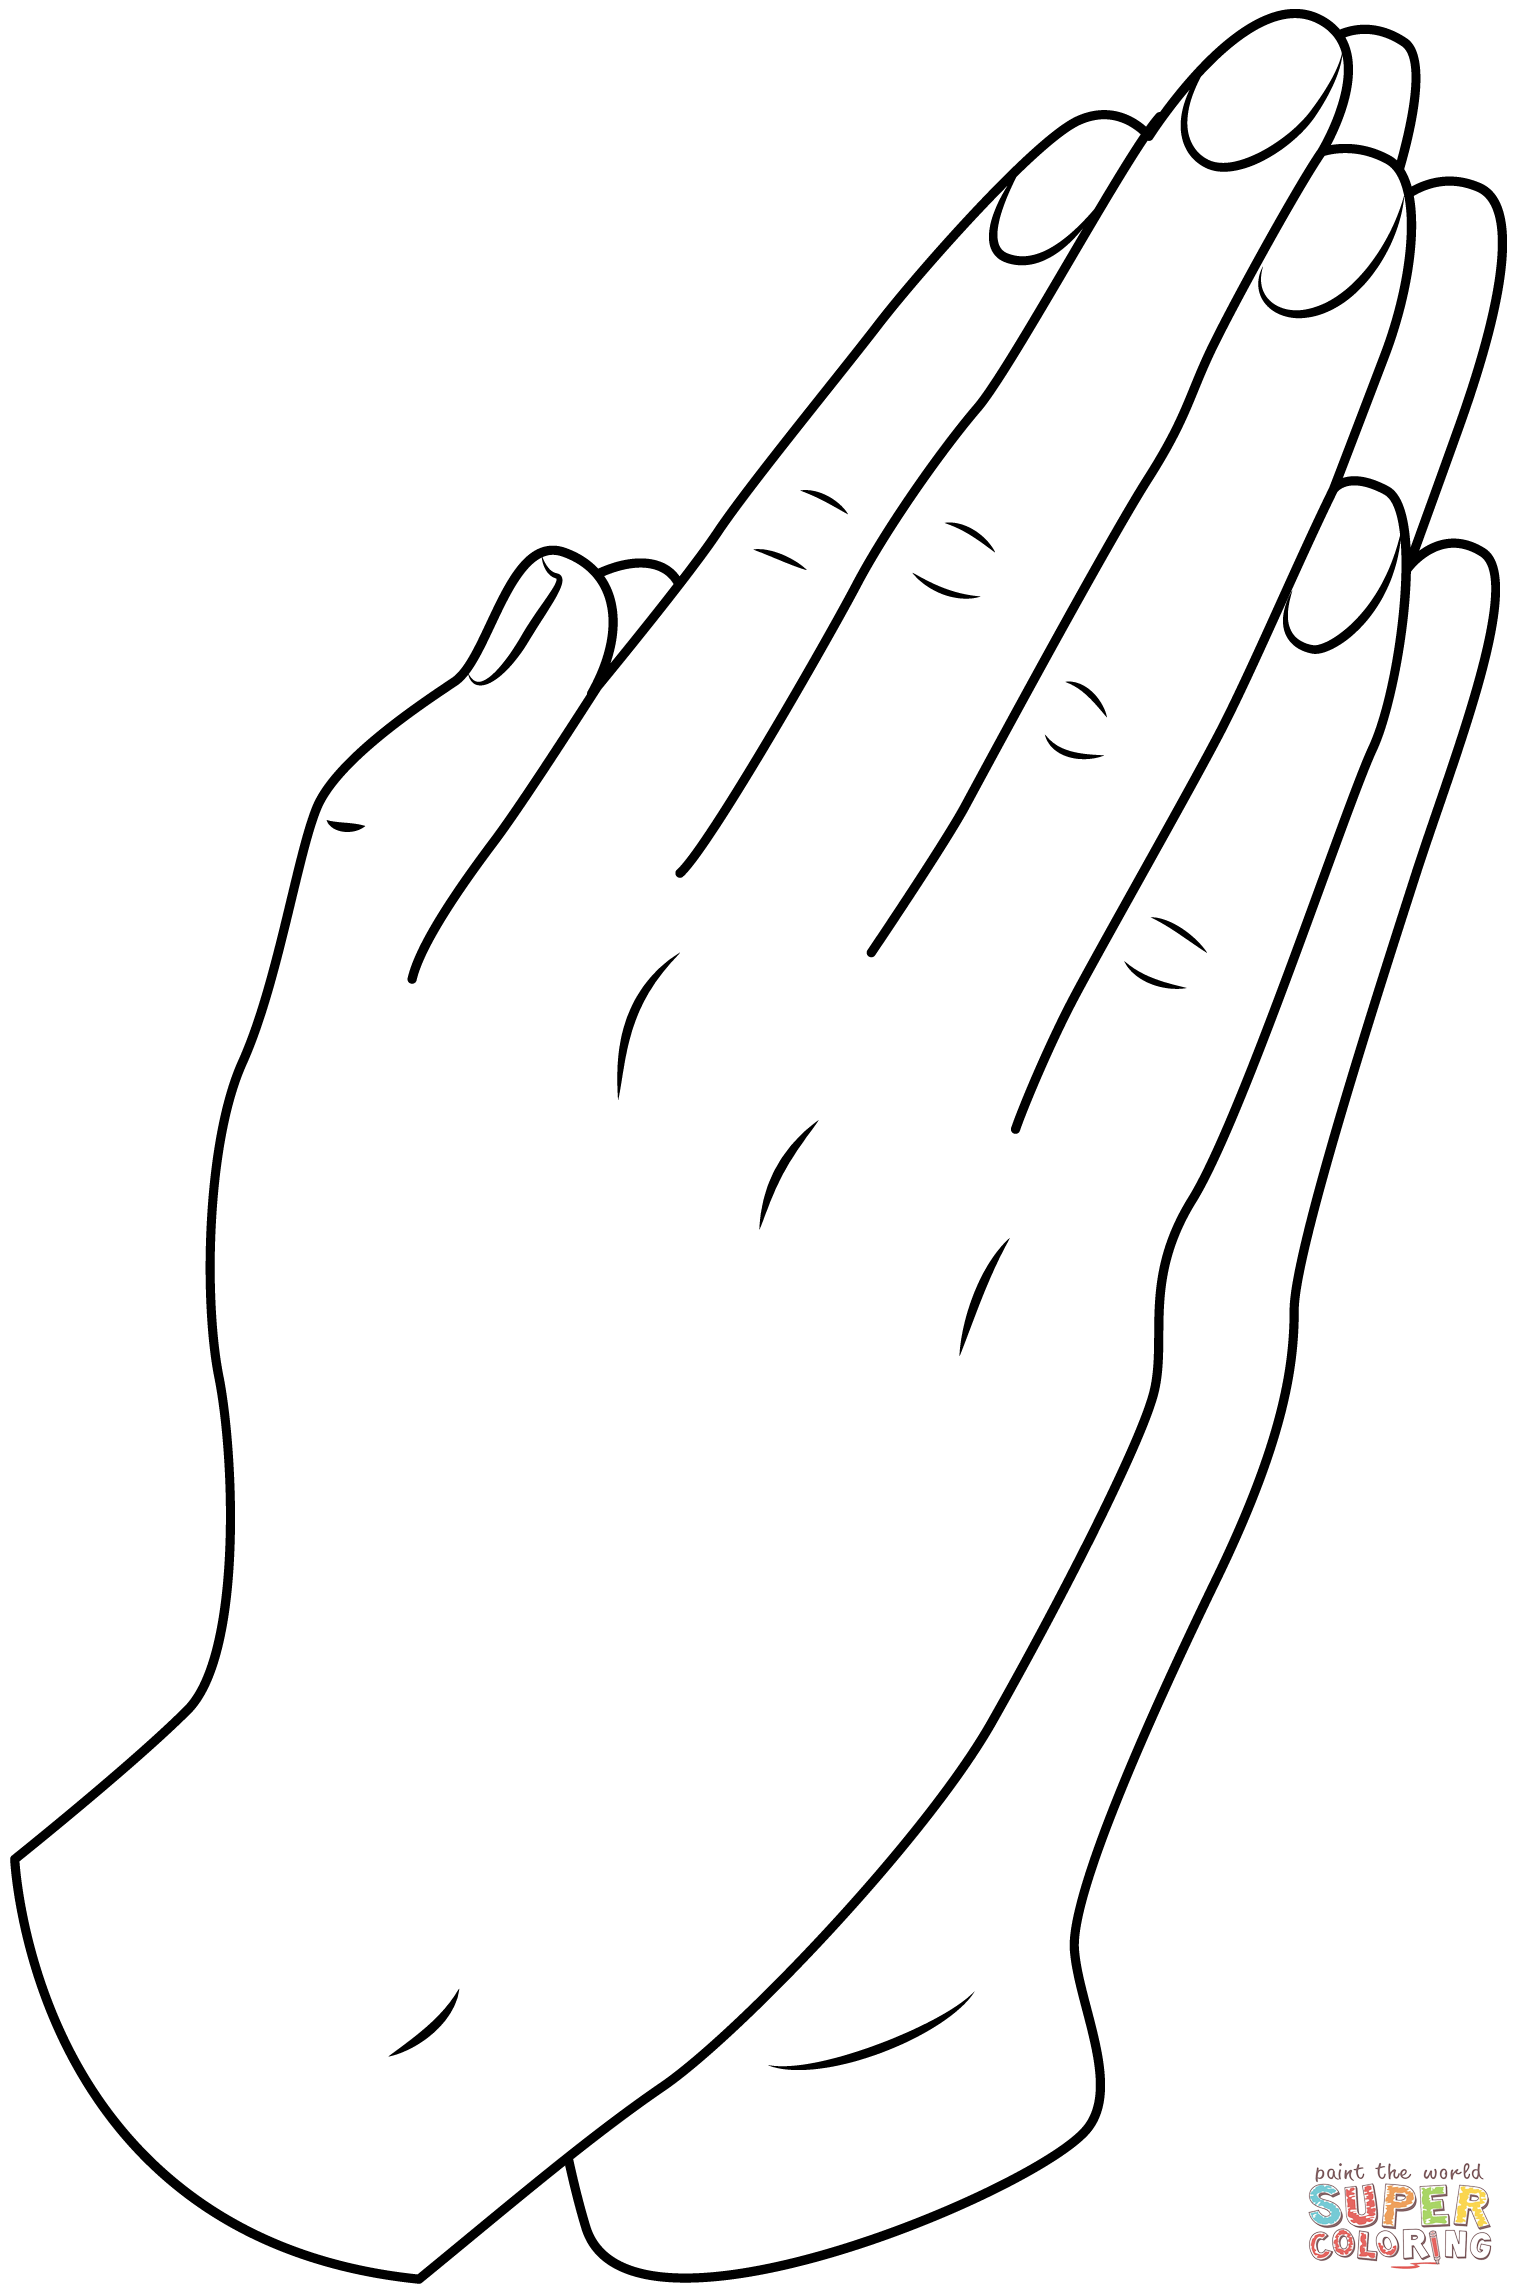 Praying hands coloring page free printable coloring pages